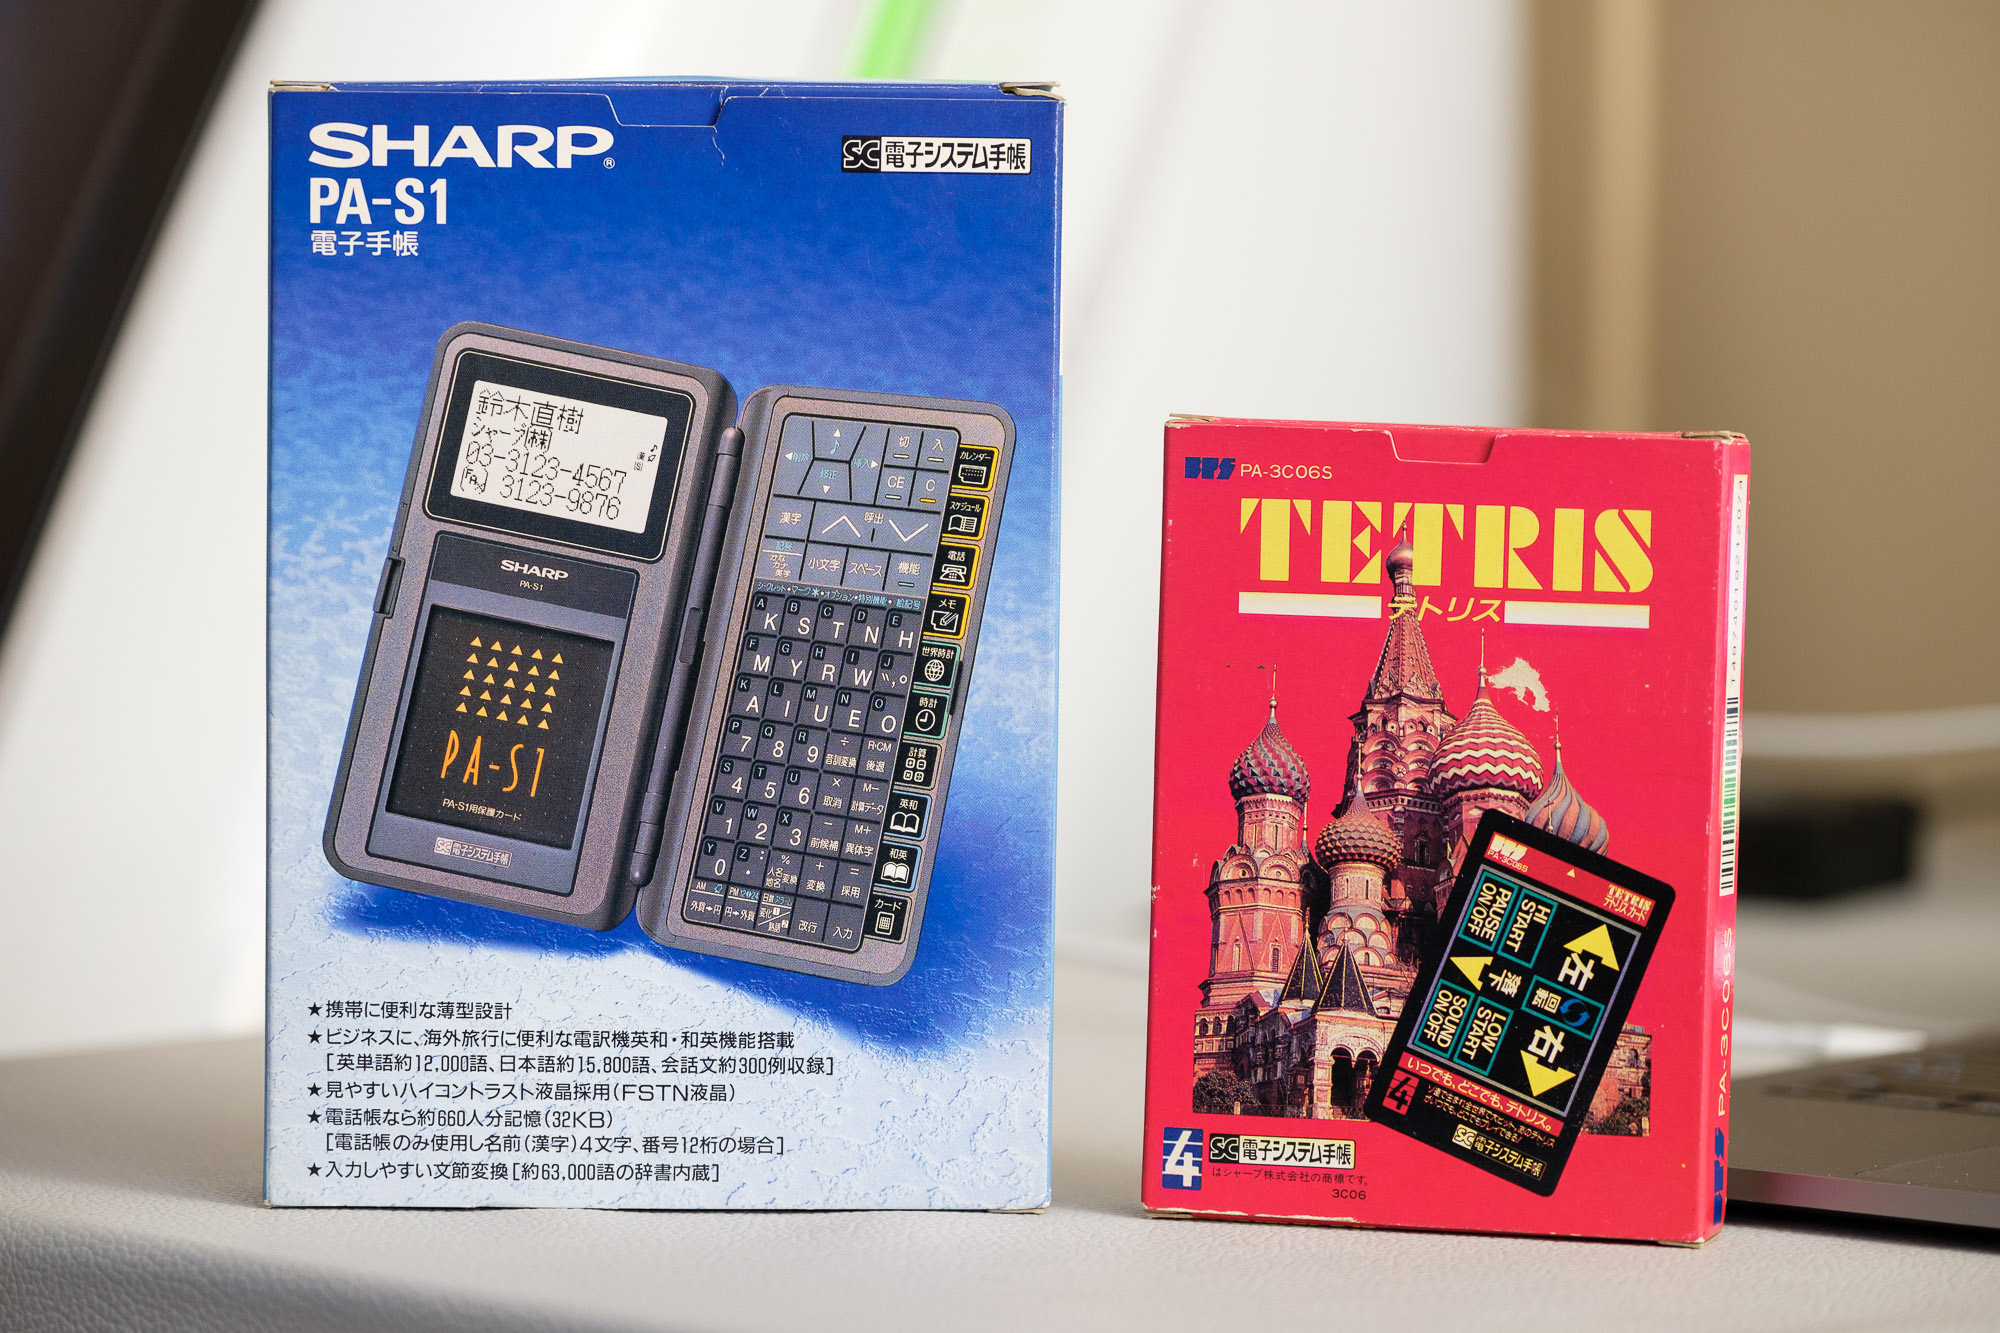 A photo with two boxes standing upright on a table. The first box is of a Sharp PA-S1, an obsolete PDA. The second box is for the game Tetris for Sharp PDA devices like the one next to it.